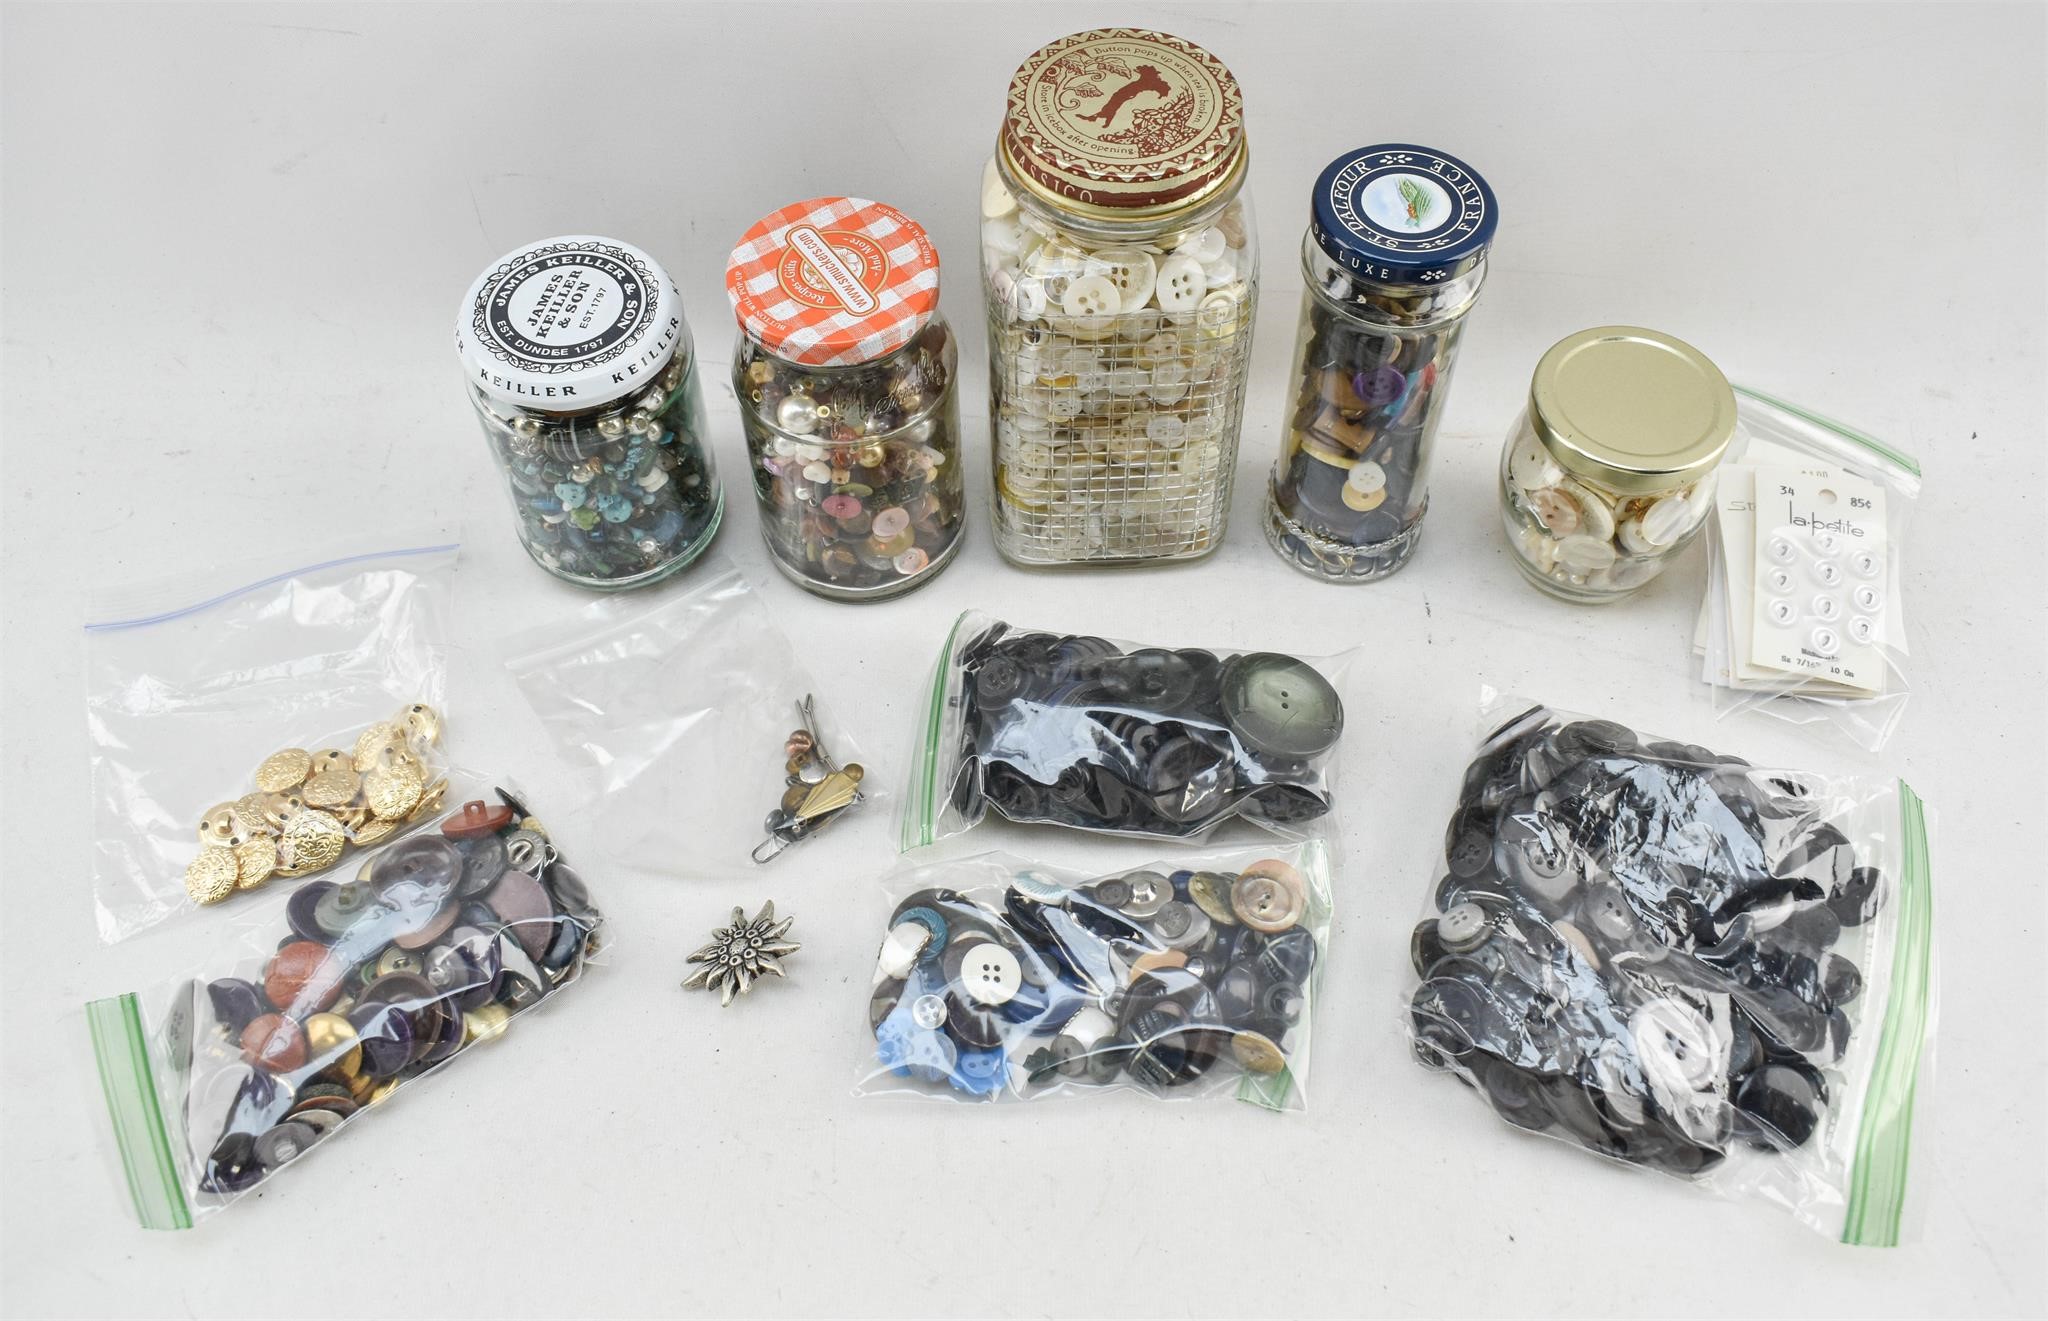 Large Assortment of Buttons and Beads